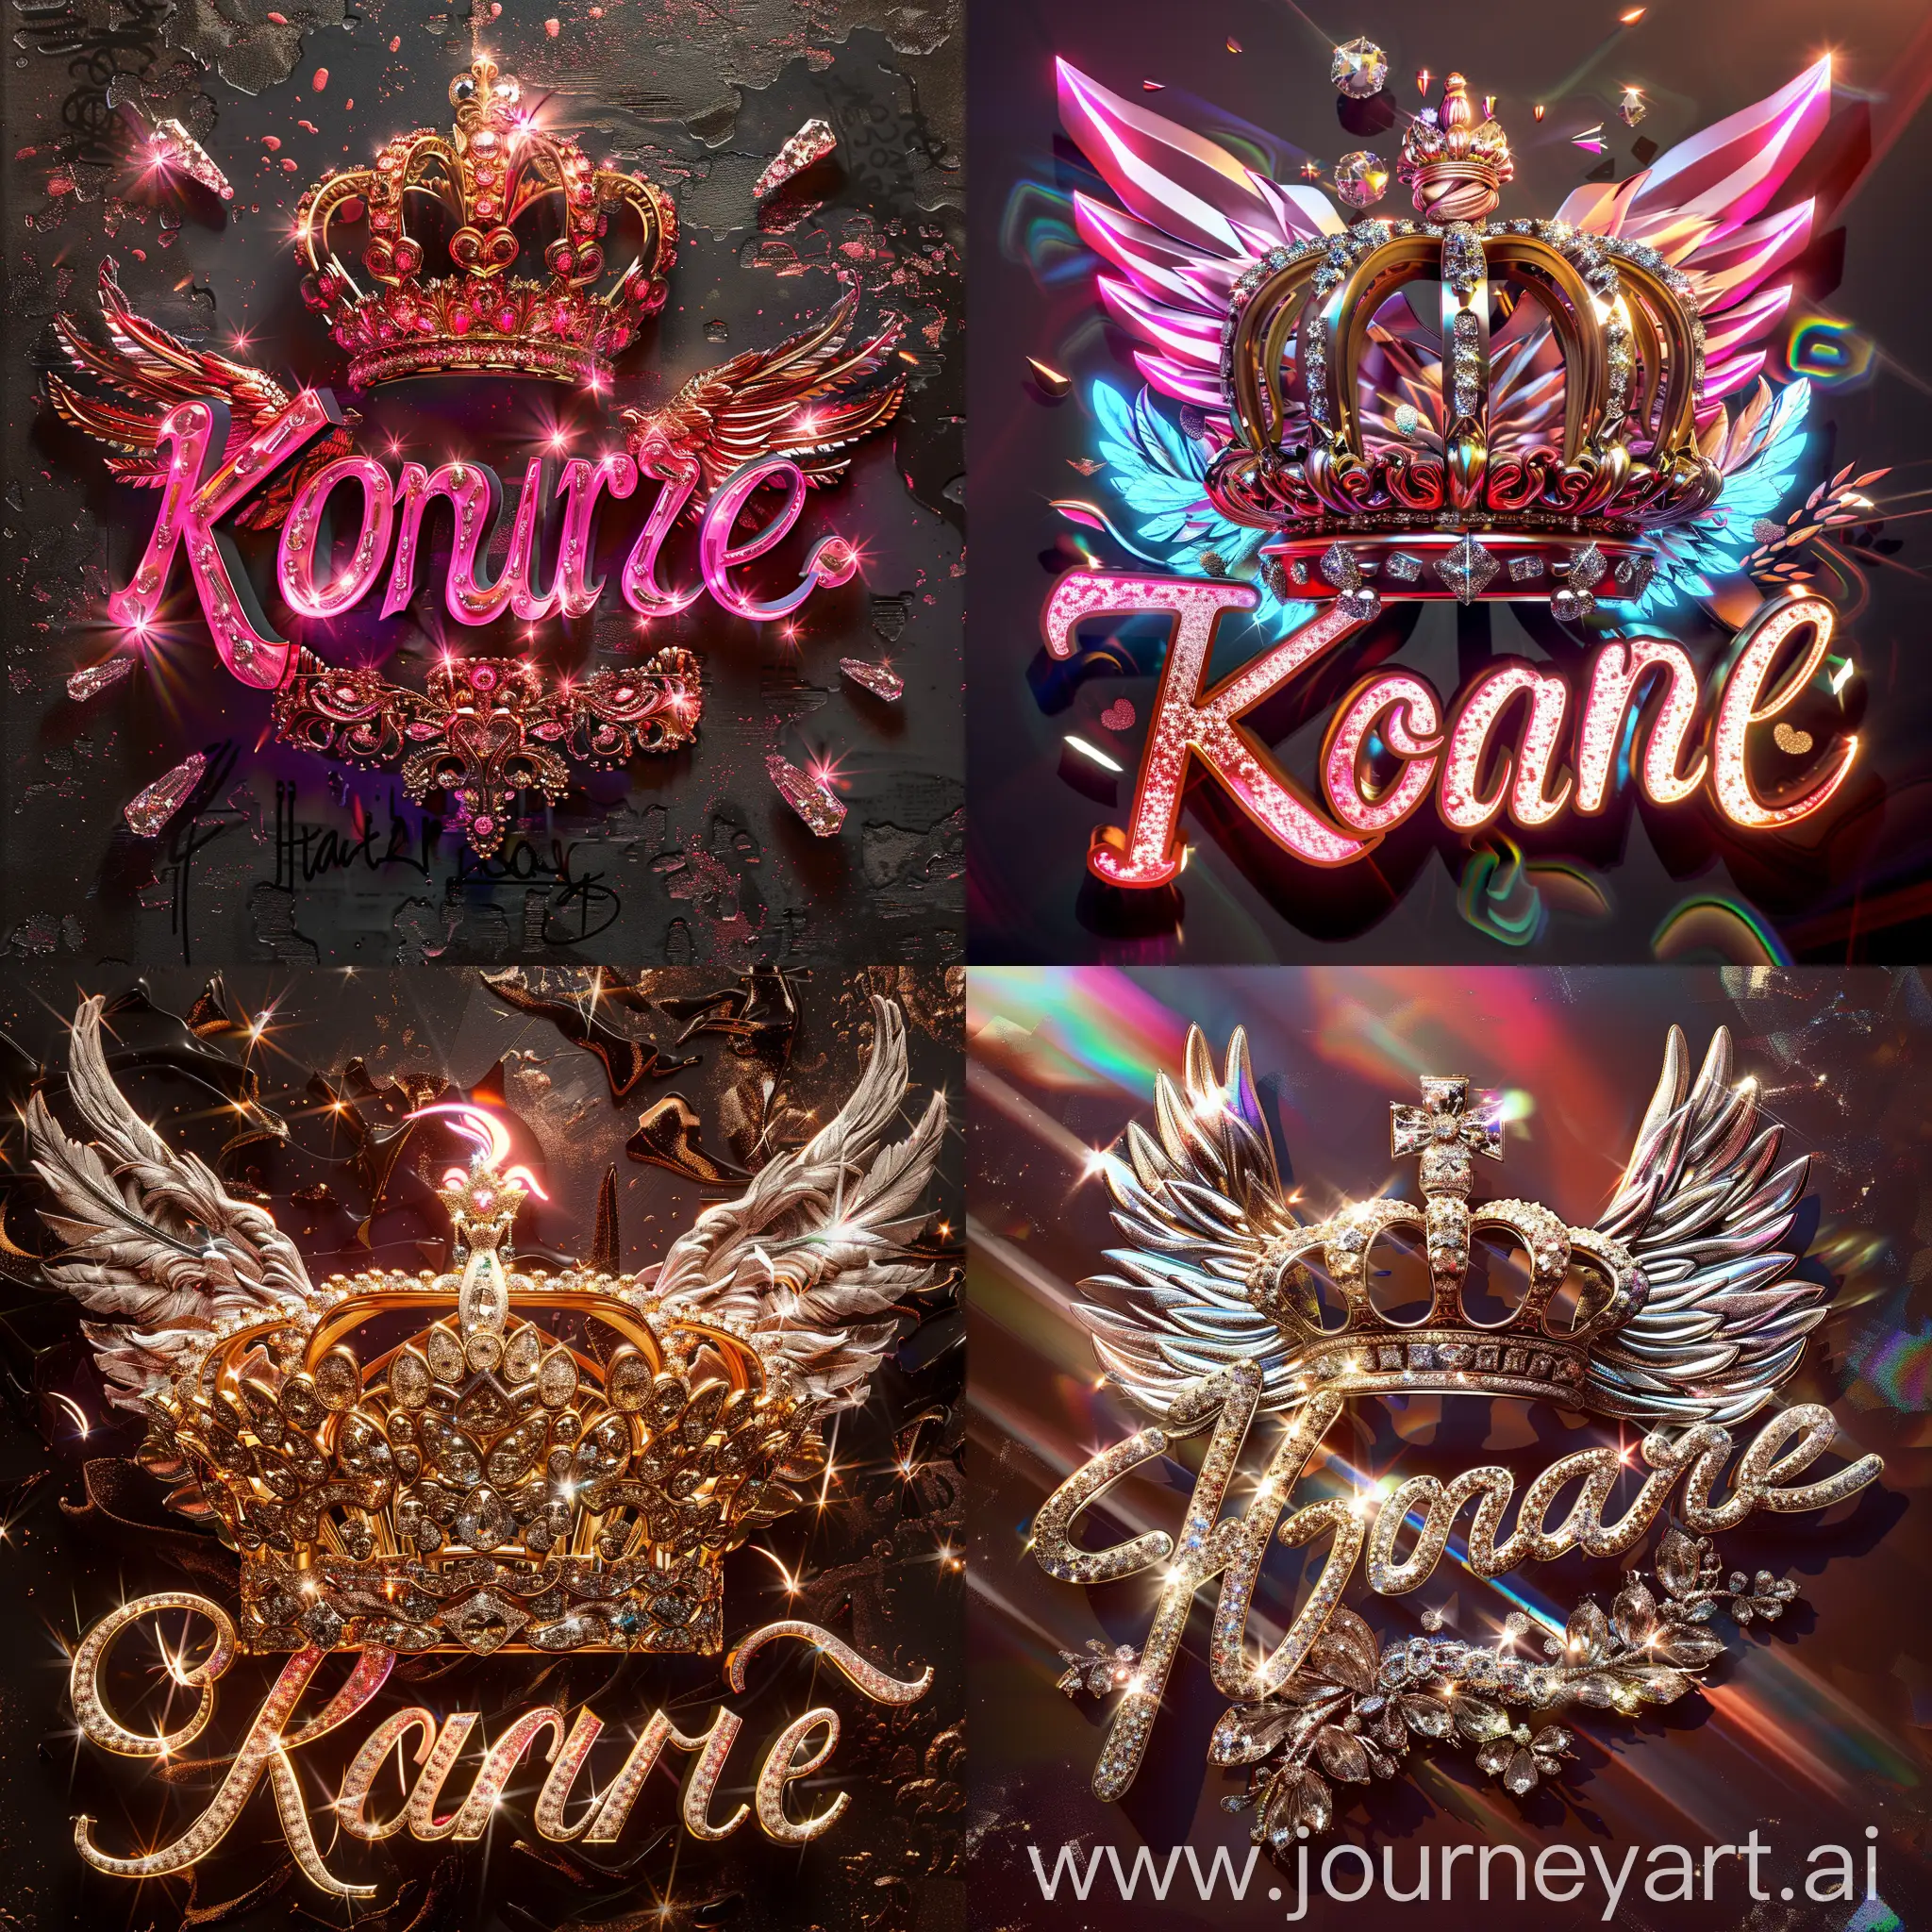 Elegant 3D typography with the name. "konaré" with an elegant crown and fine diamonds with sparkles of bright colors and angel wings, photo, typography, vibrantv0.1, graffiti, illustration, photo, product, fashion, poster